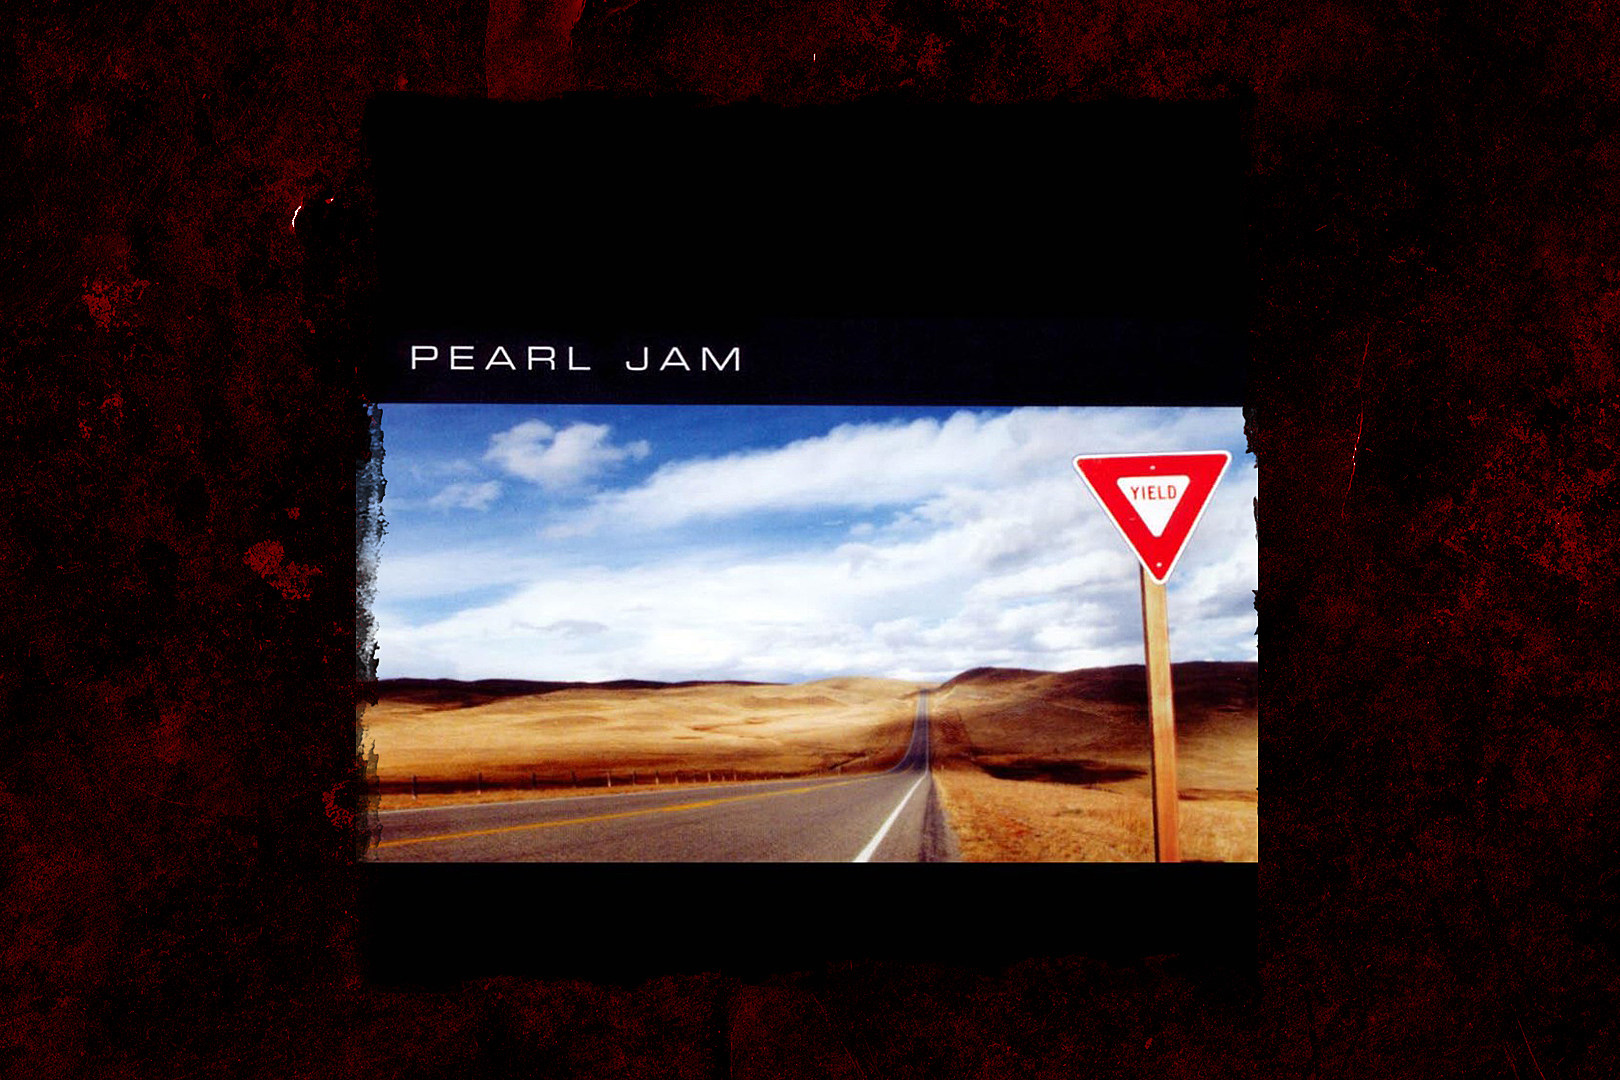 26 Years Ago: Pearl Jam Rebound With ‘Yield’ Album